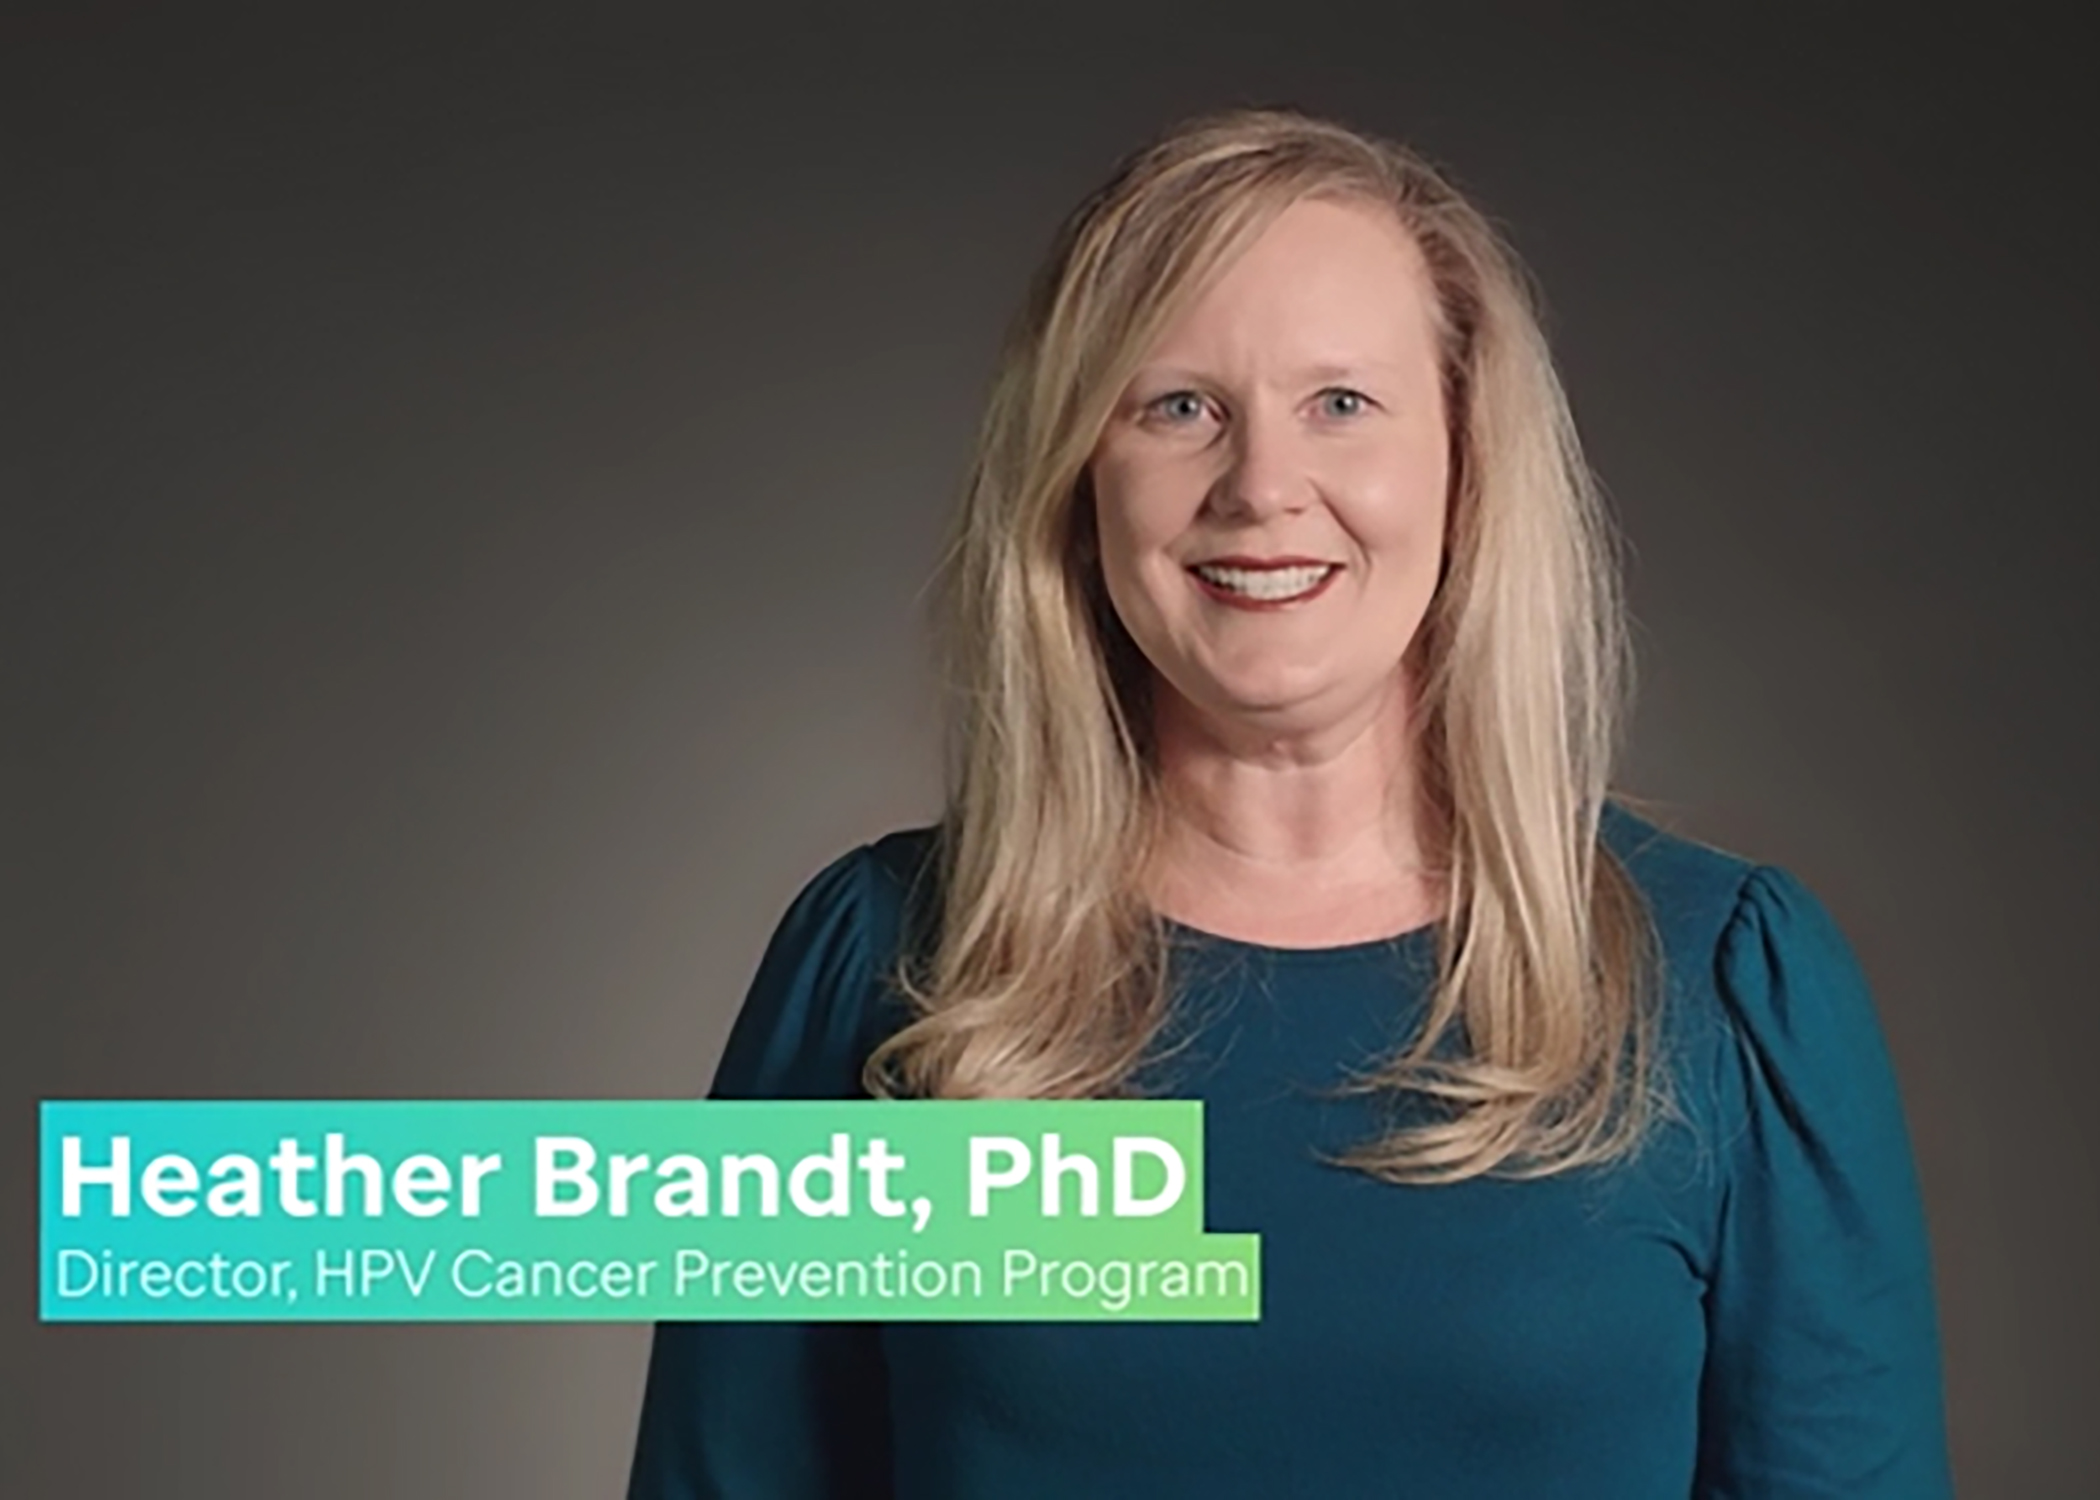 Heather Brandt, Ph.D., leads cancer prevention community outreach projects for St. Jude. Here she explains why HPV vaccination is so important.